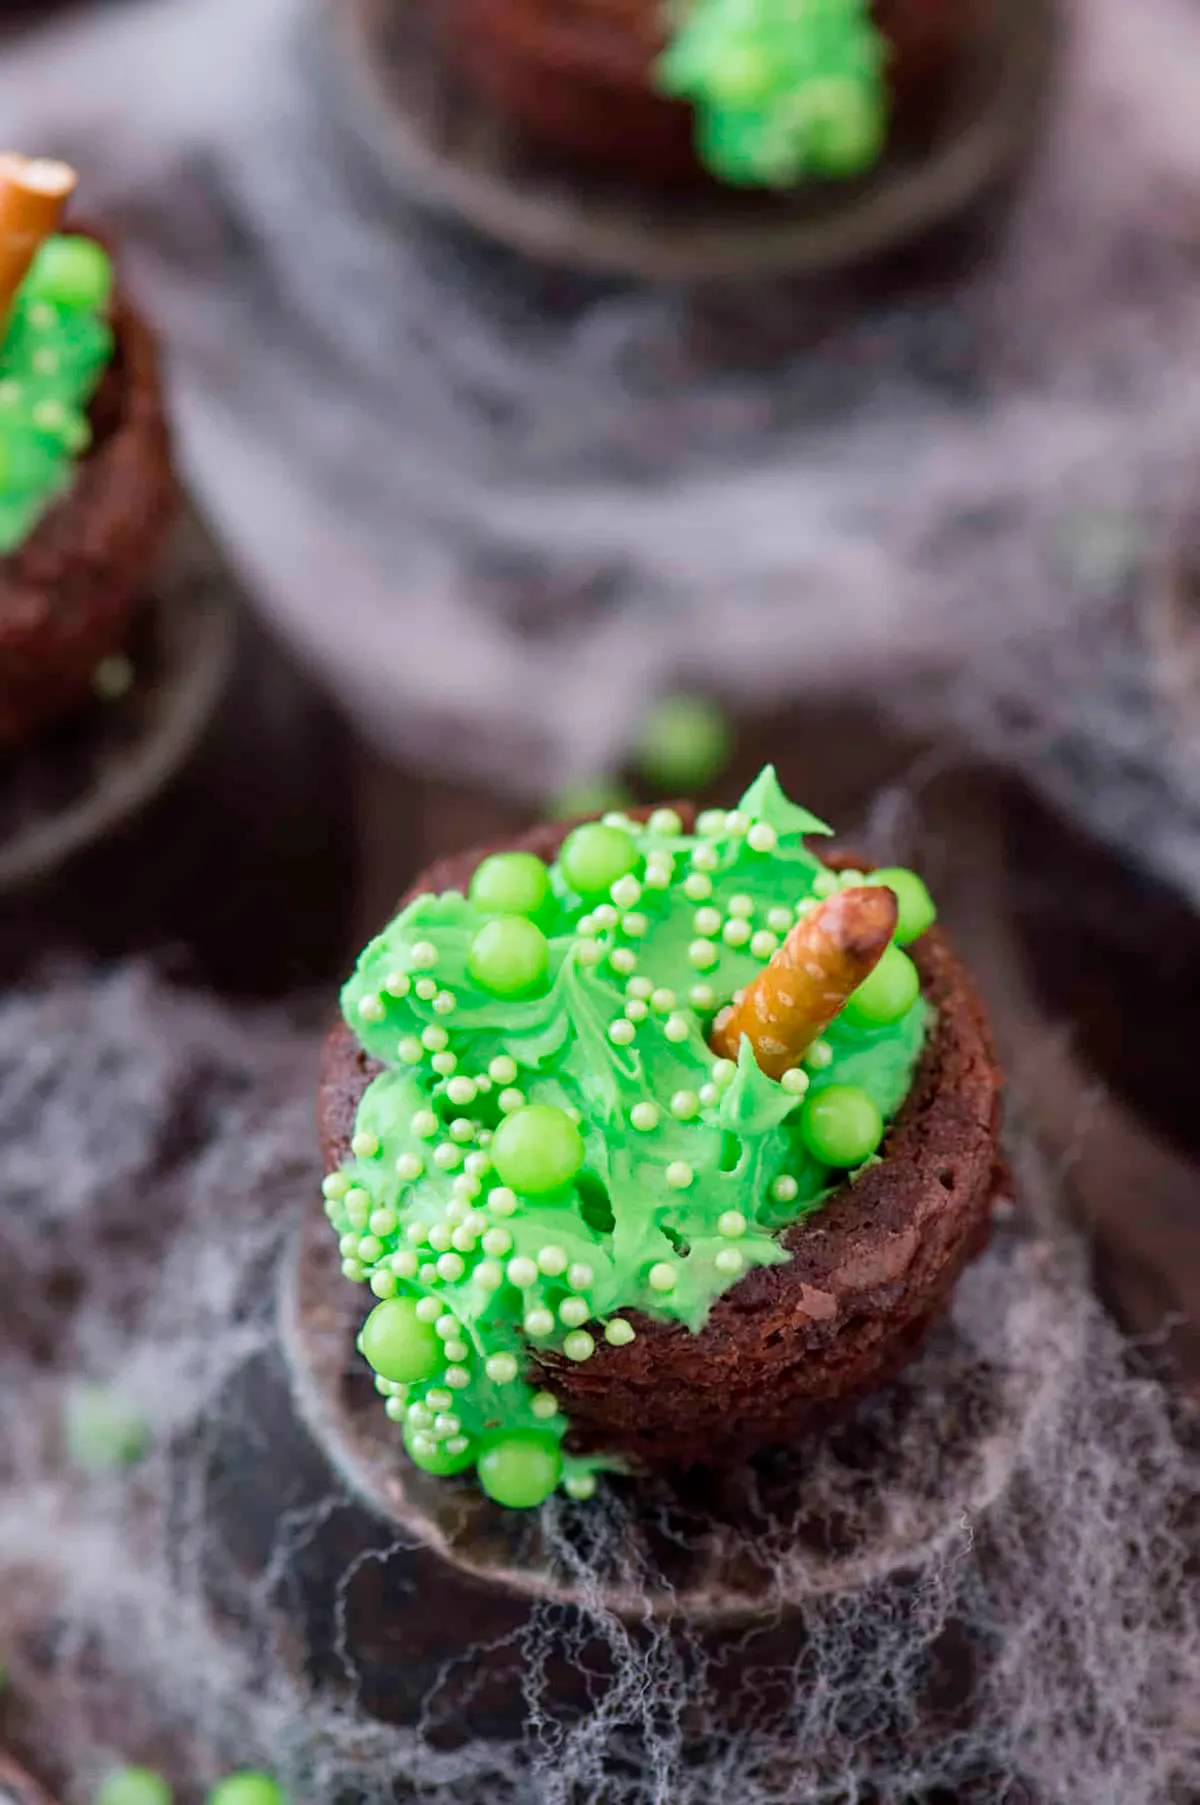 Bubbling witches cauldron brownies